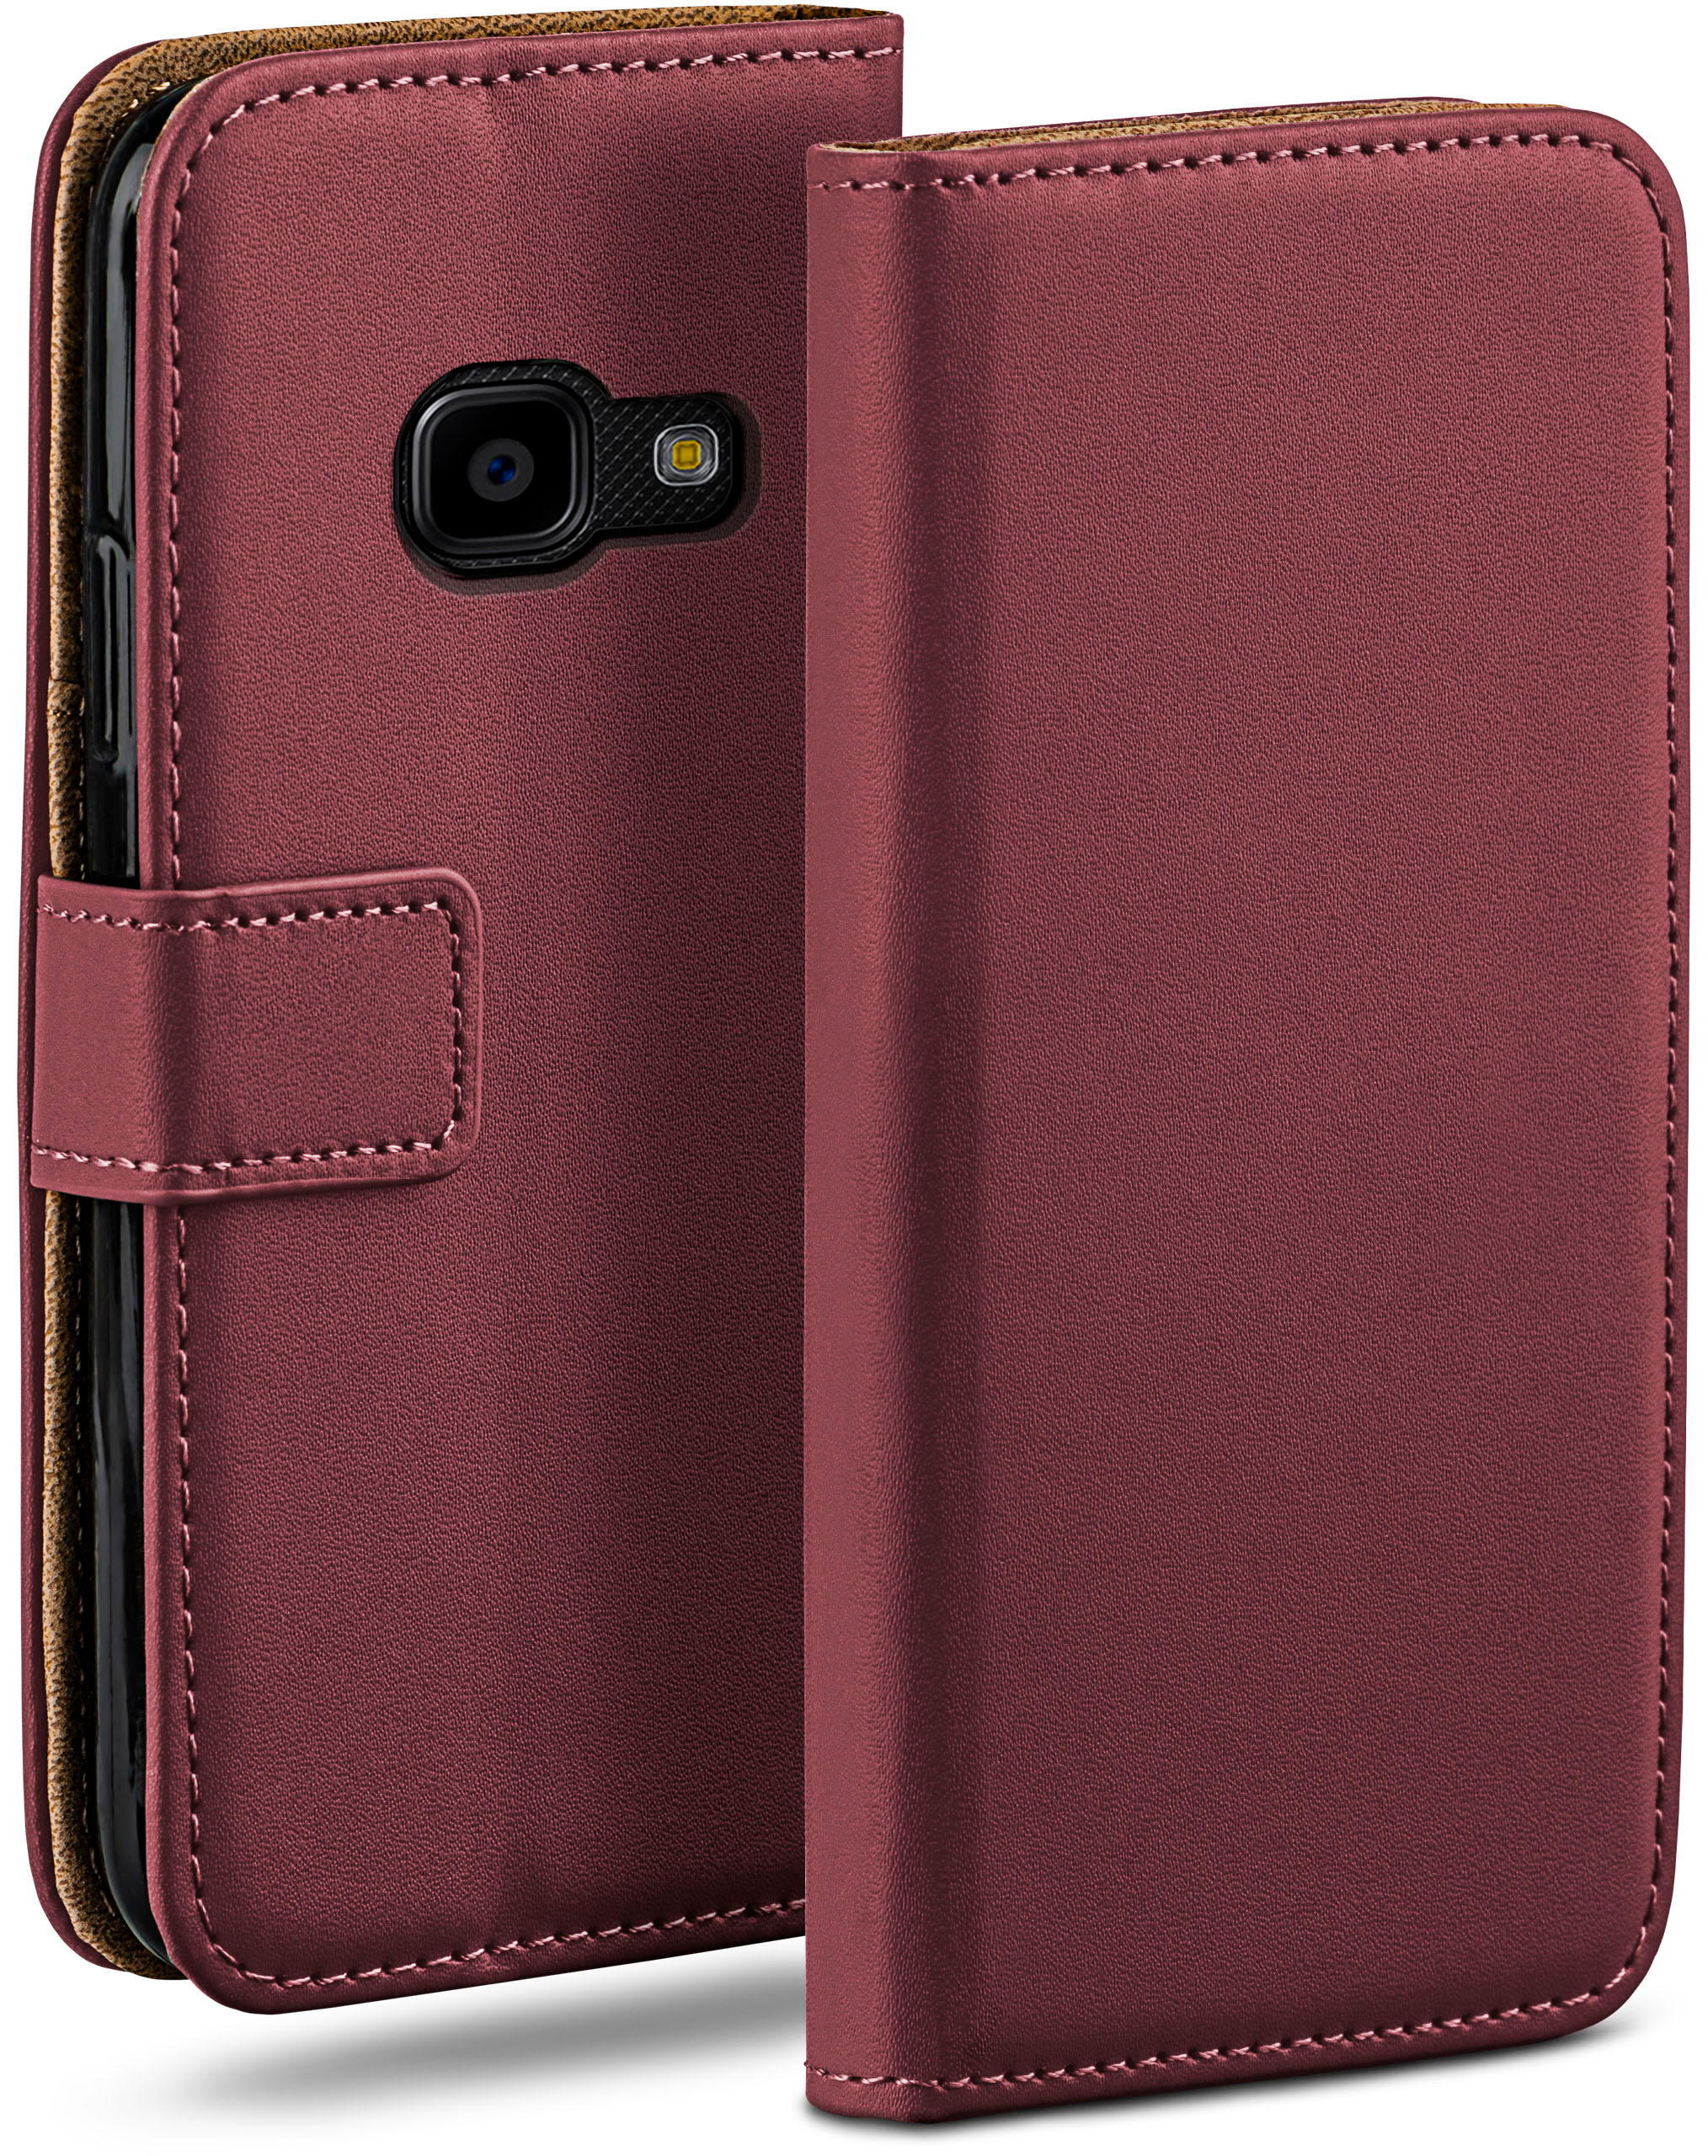 Galaxy Case, Xcover Samsung, Maroon-Red MOEX Bookcover, 4, Book